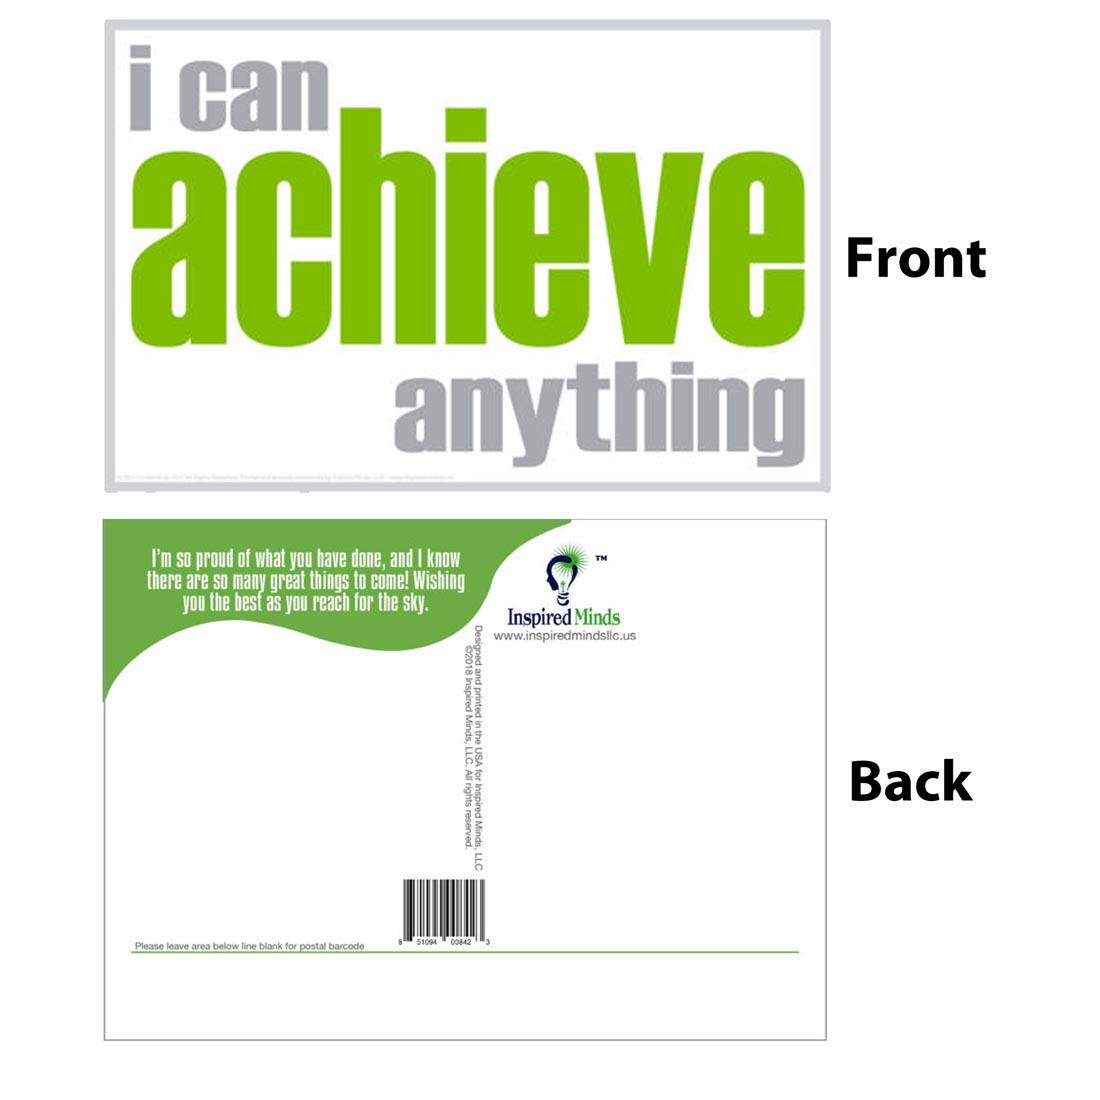 Front and back of the I Can Achieve Anything Postcard